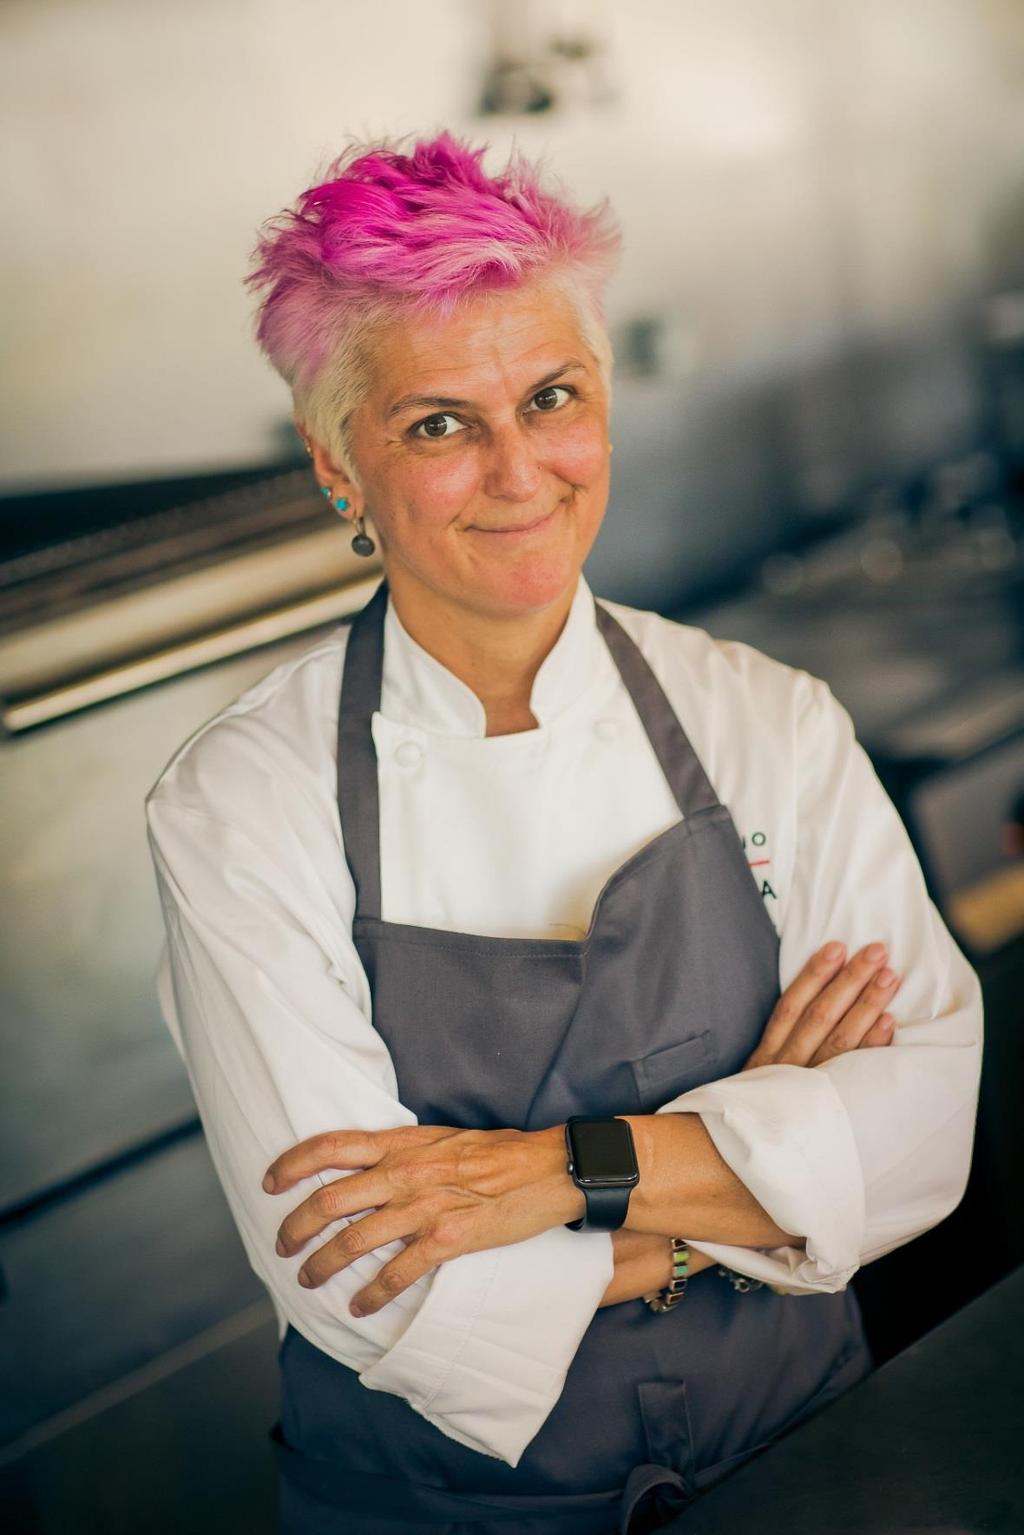 Michelin-starred Italian Guest Chef Cristina Bowerman The CICC is glad to announce that Michelin-starred Italian Chef Cristina Bowerman is going to design this year s dinner menu.